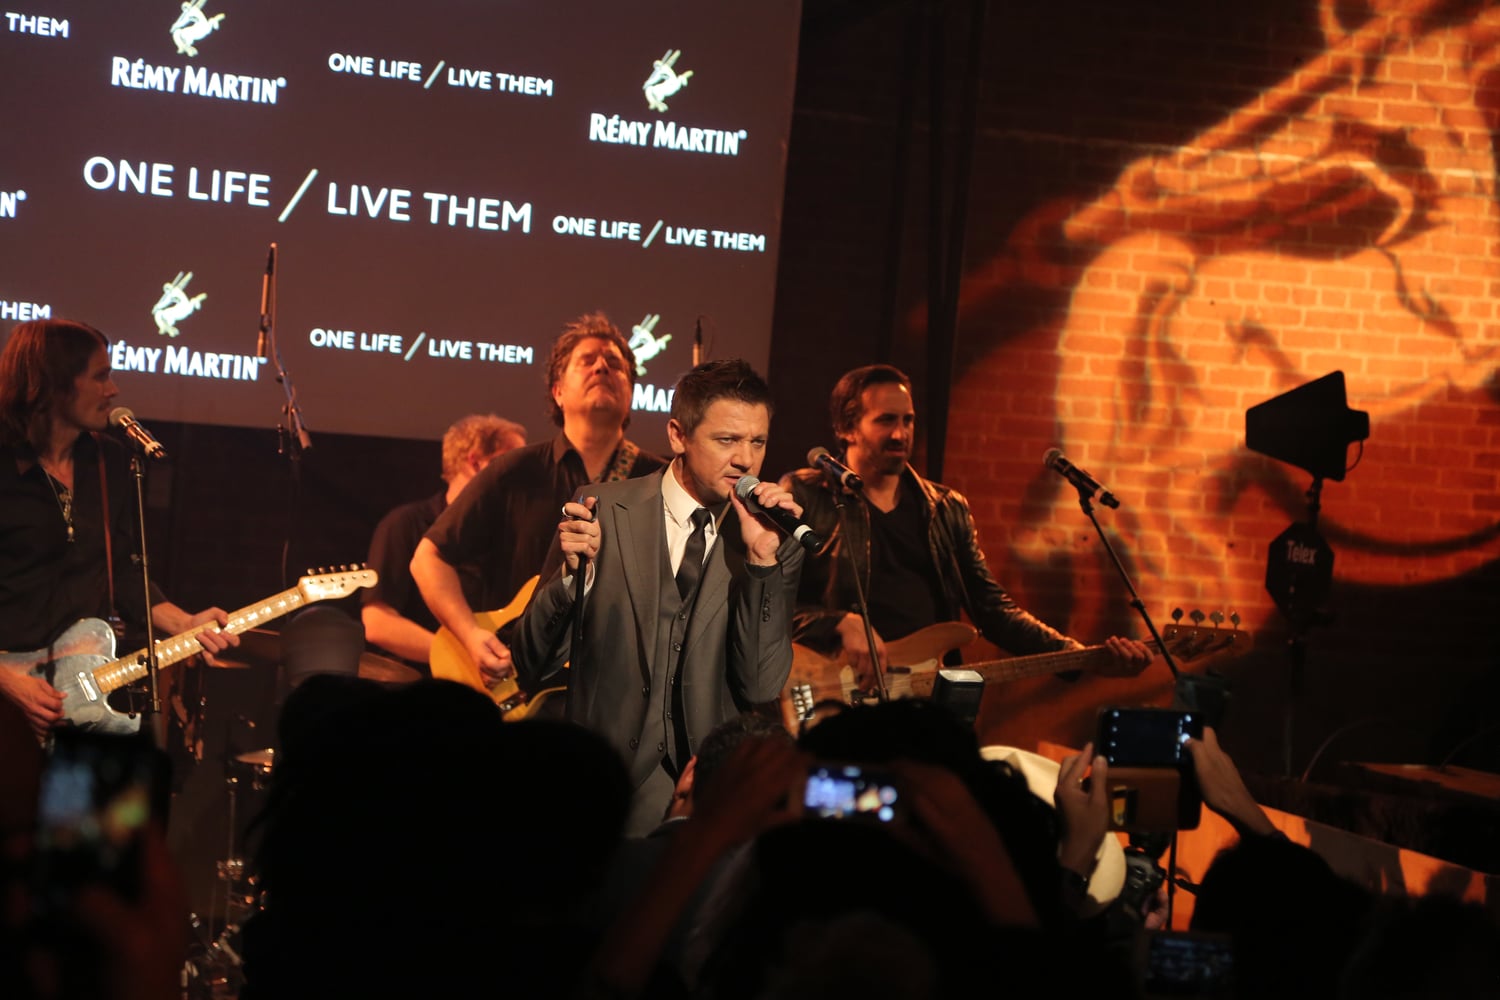 Jeremy+Renner+performs+at+Remy+Martin+One+Life-Live+Them+Campaign+Launch.jpeg